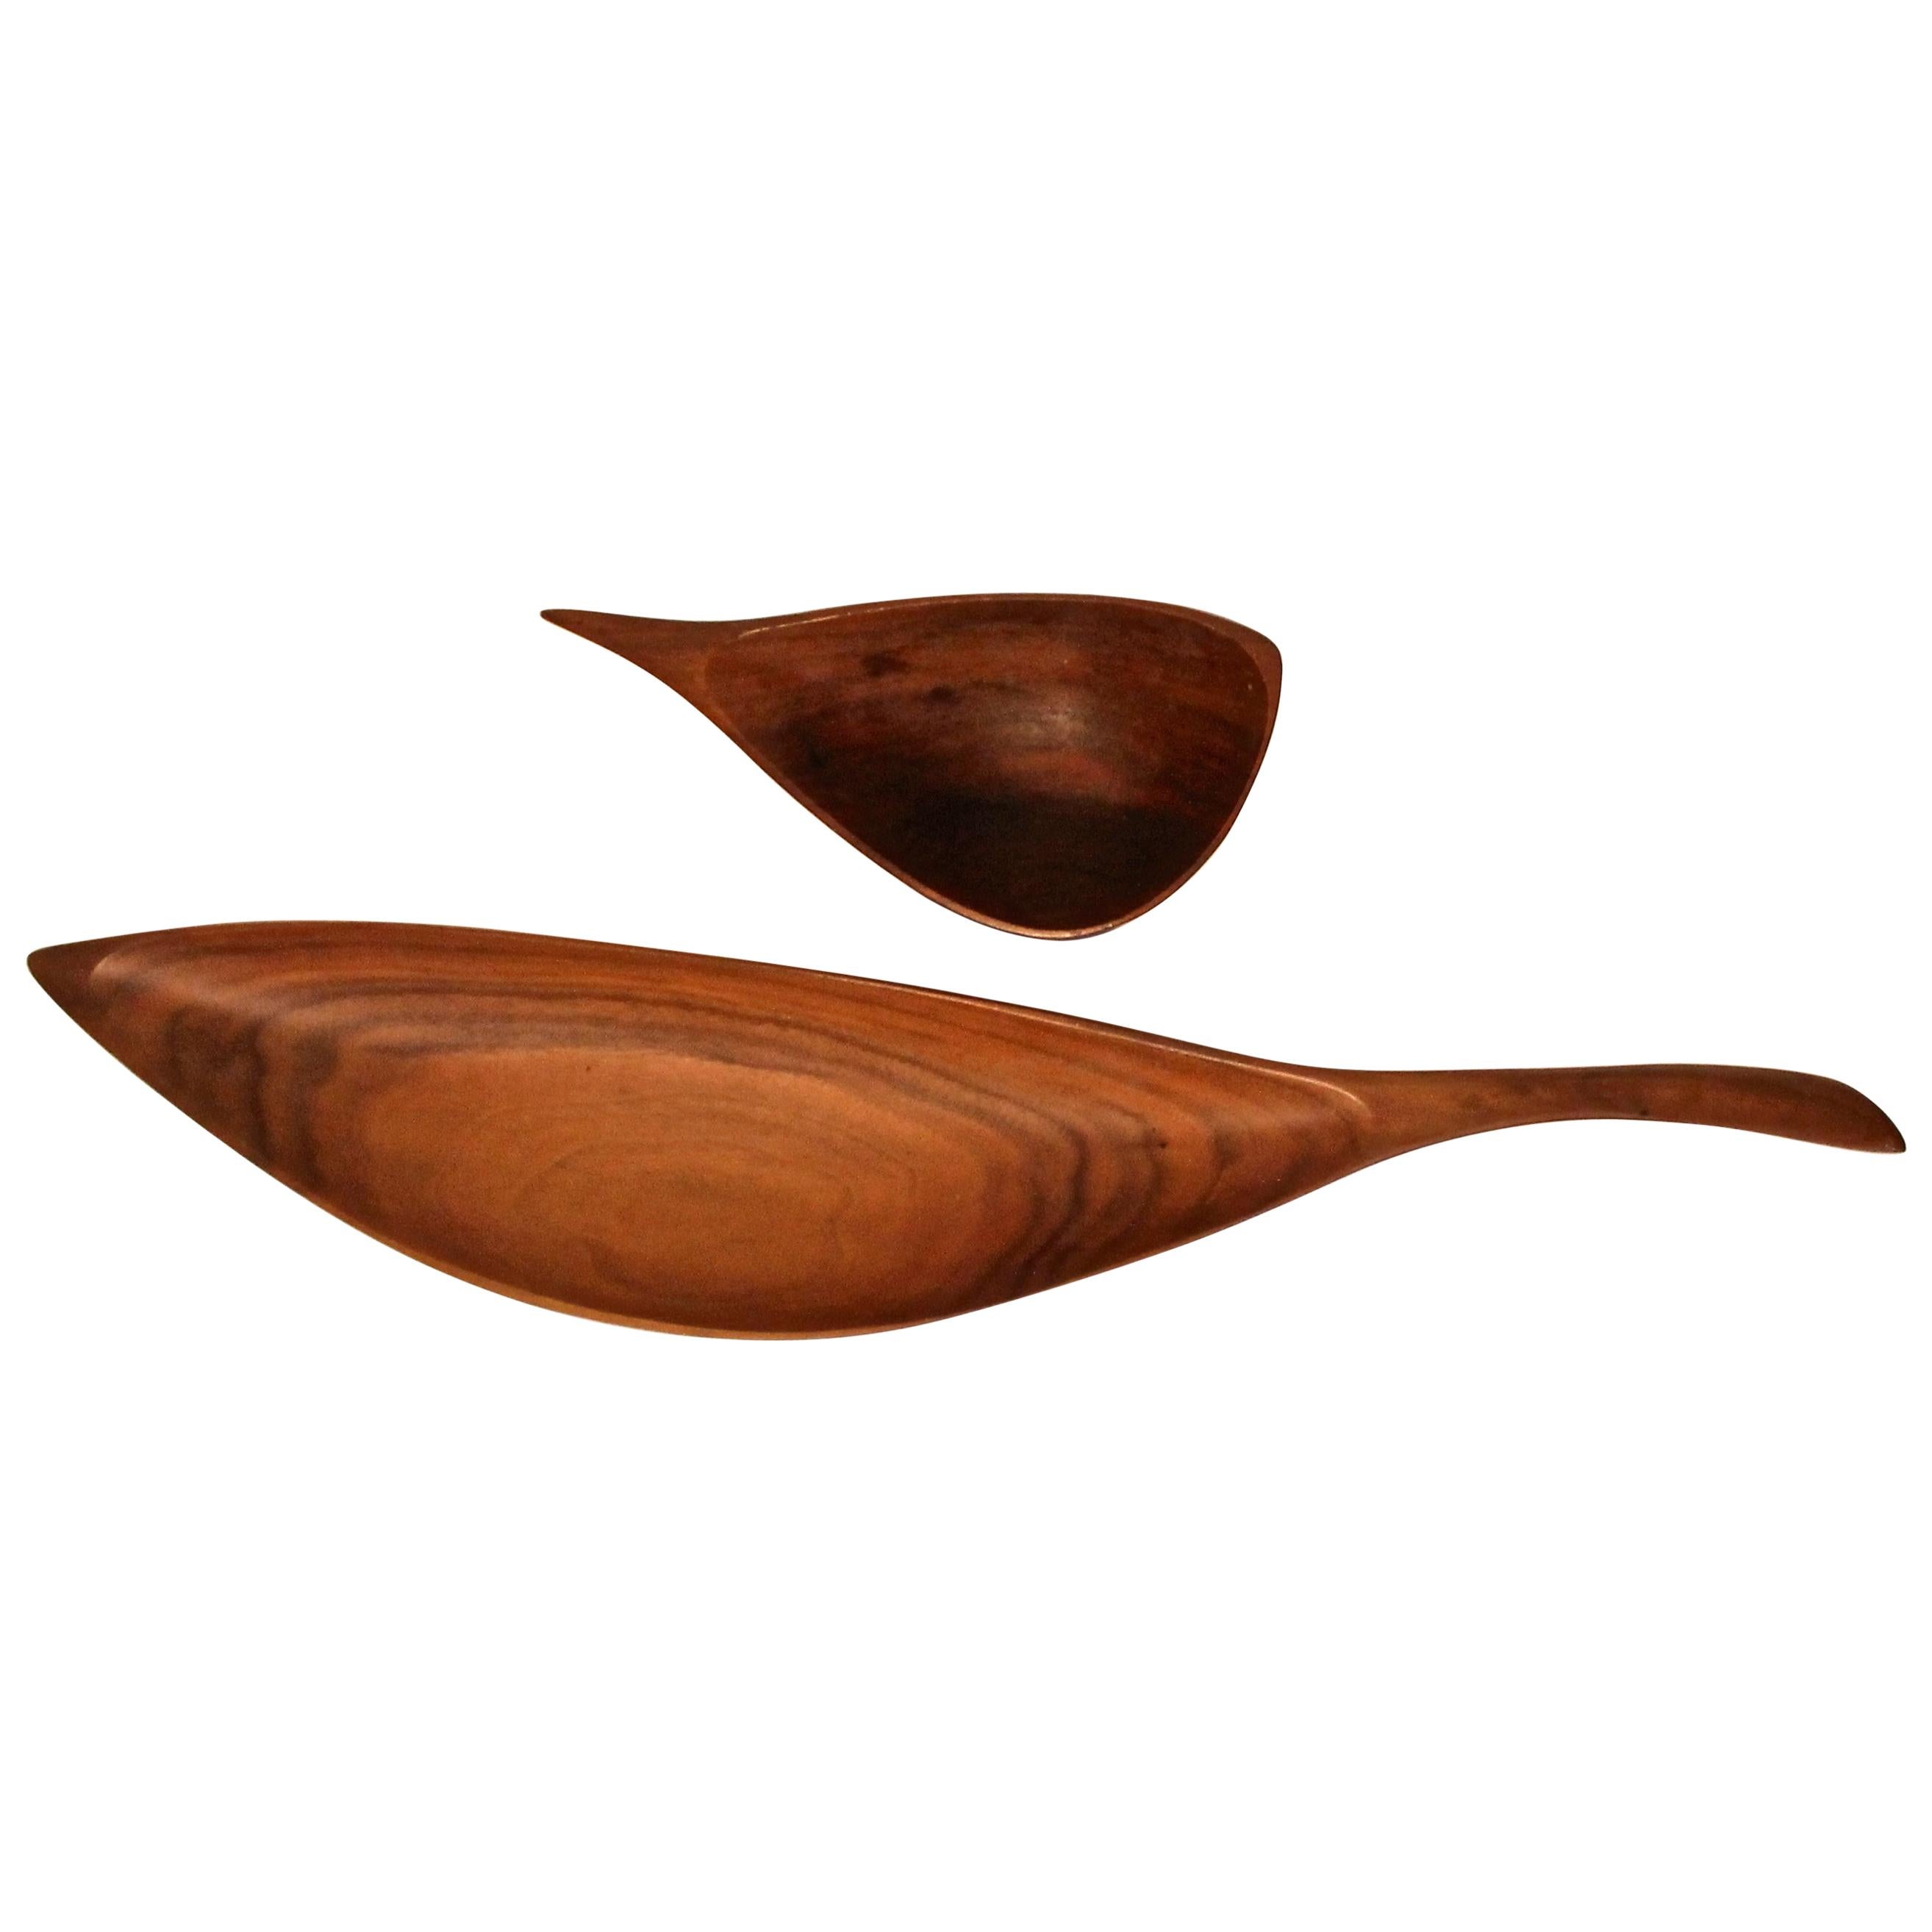 Two Emil Milan 'Emilan' Handcrafted Walnut Bowls For Sale